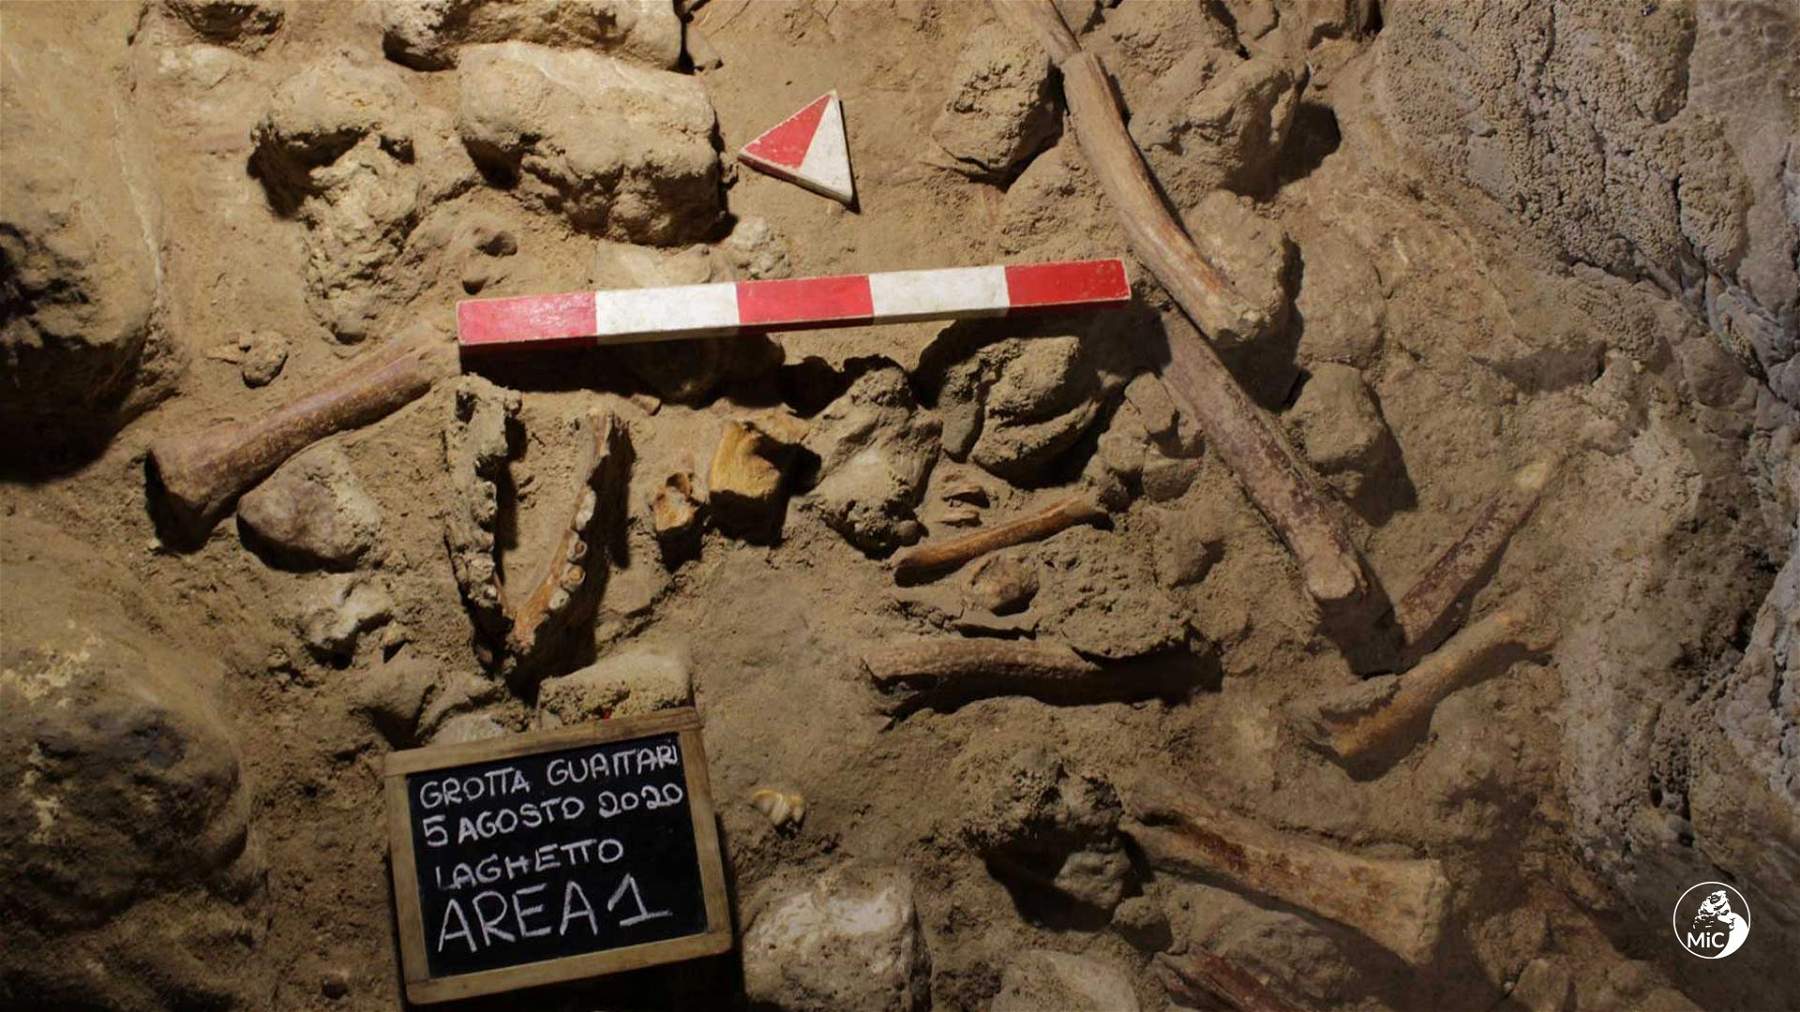 Circeo, remains of nine Neanderthals found at important Grotta Guattari site